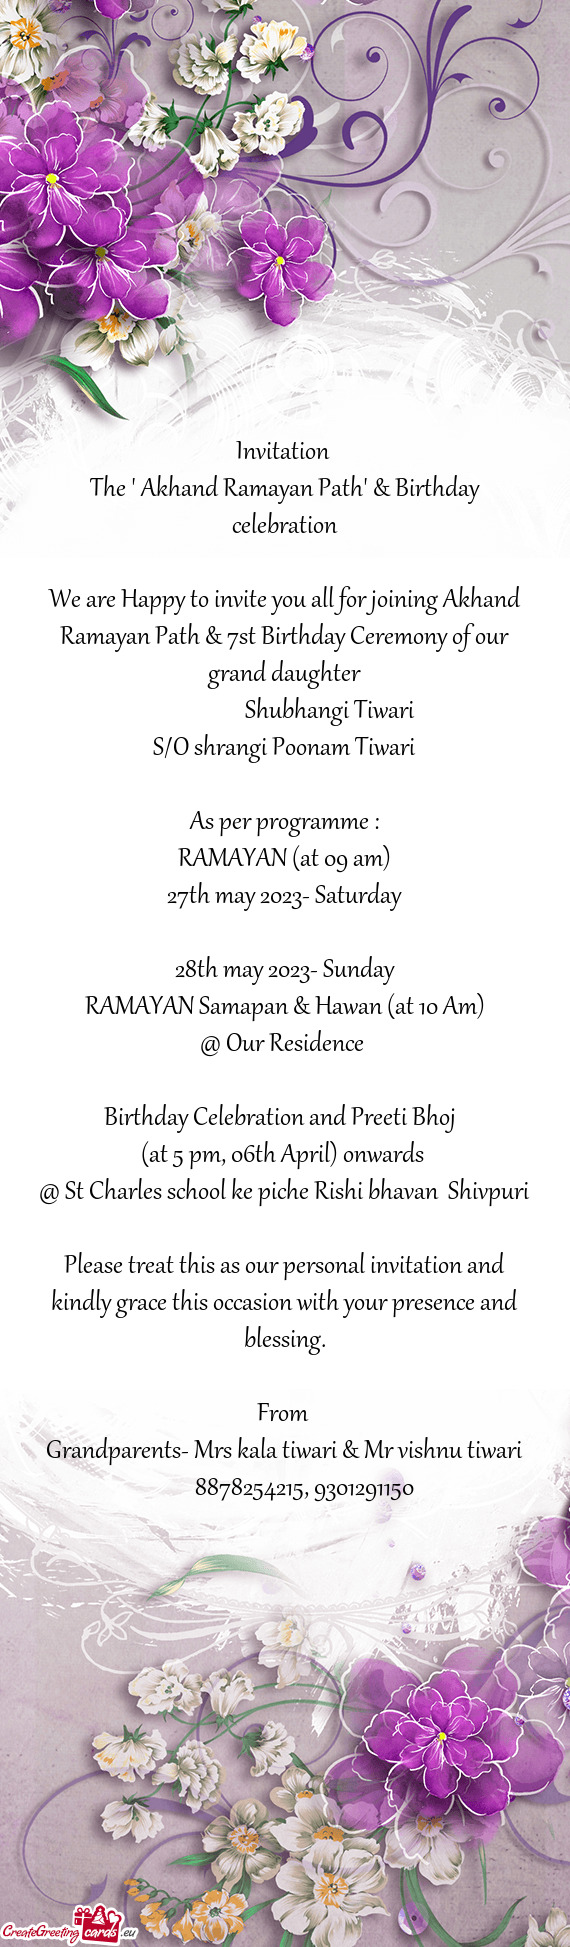 We are Happy to invite you all for joining Akhand Ramayan Path & 7st Birthday Ceremony of our grand